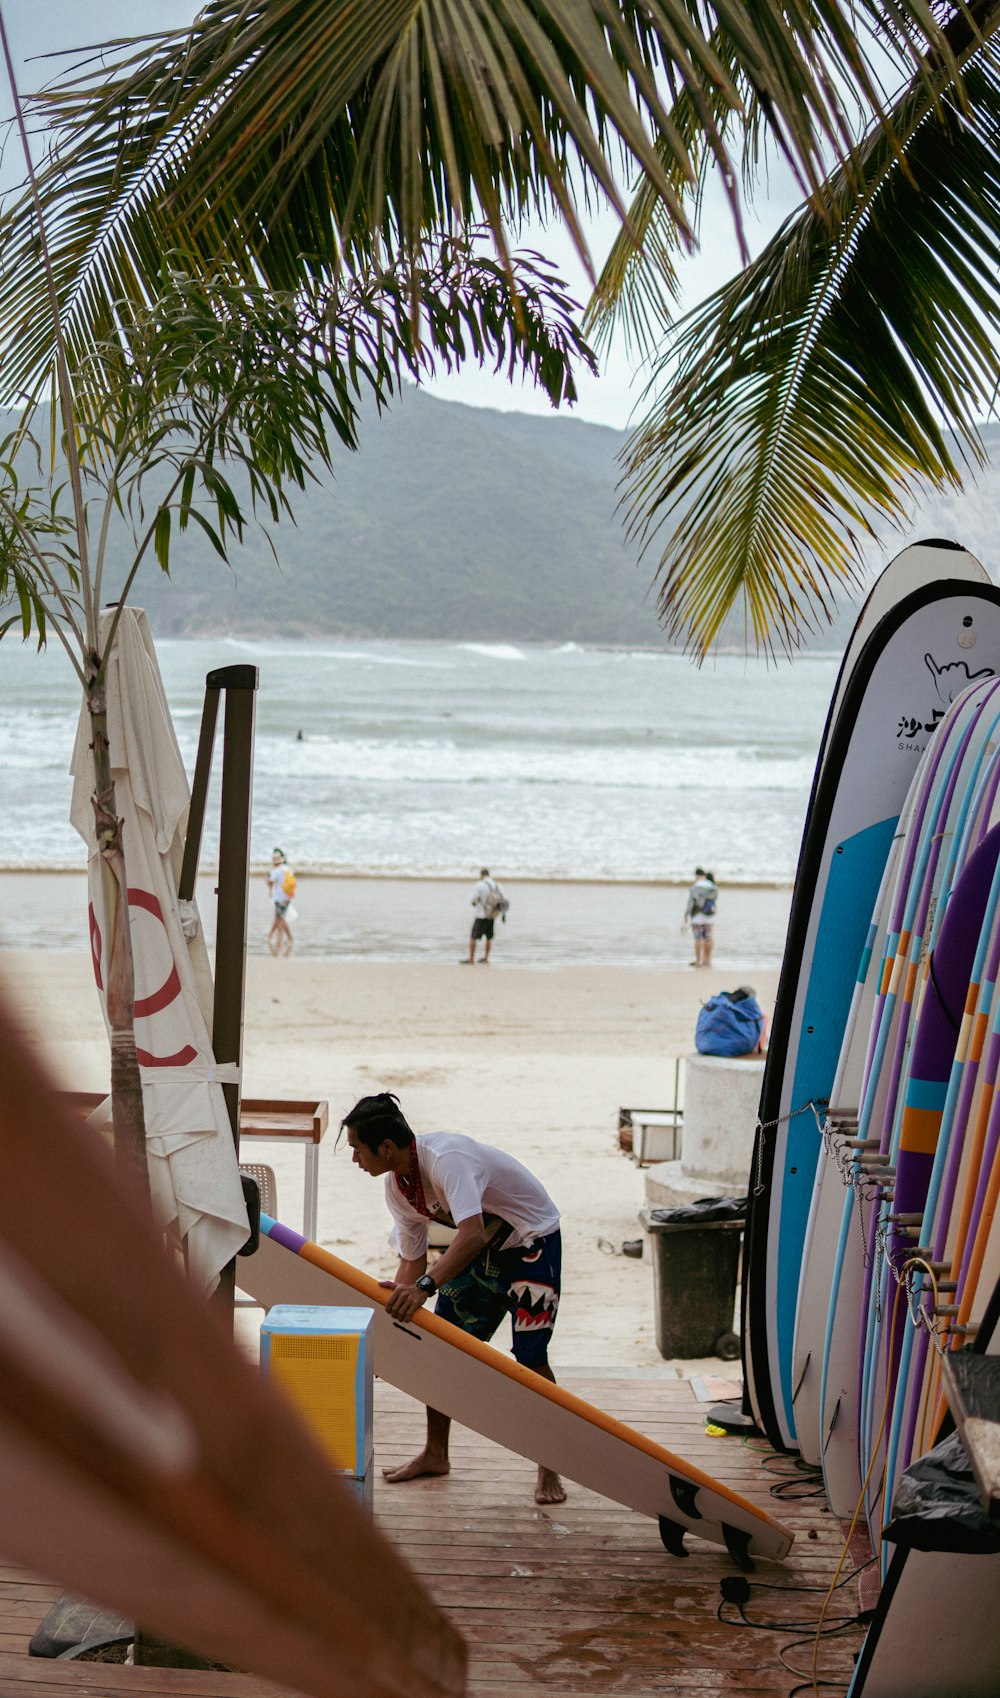 a man working on a surfboard at the beach